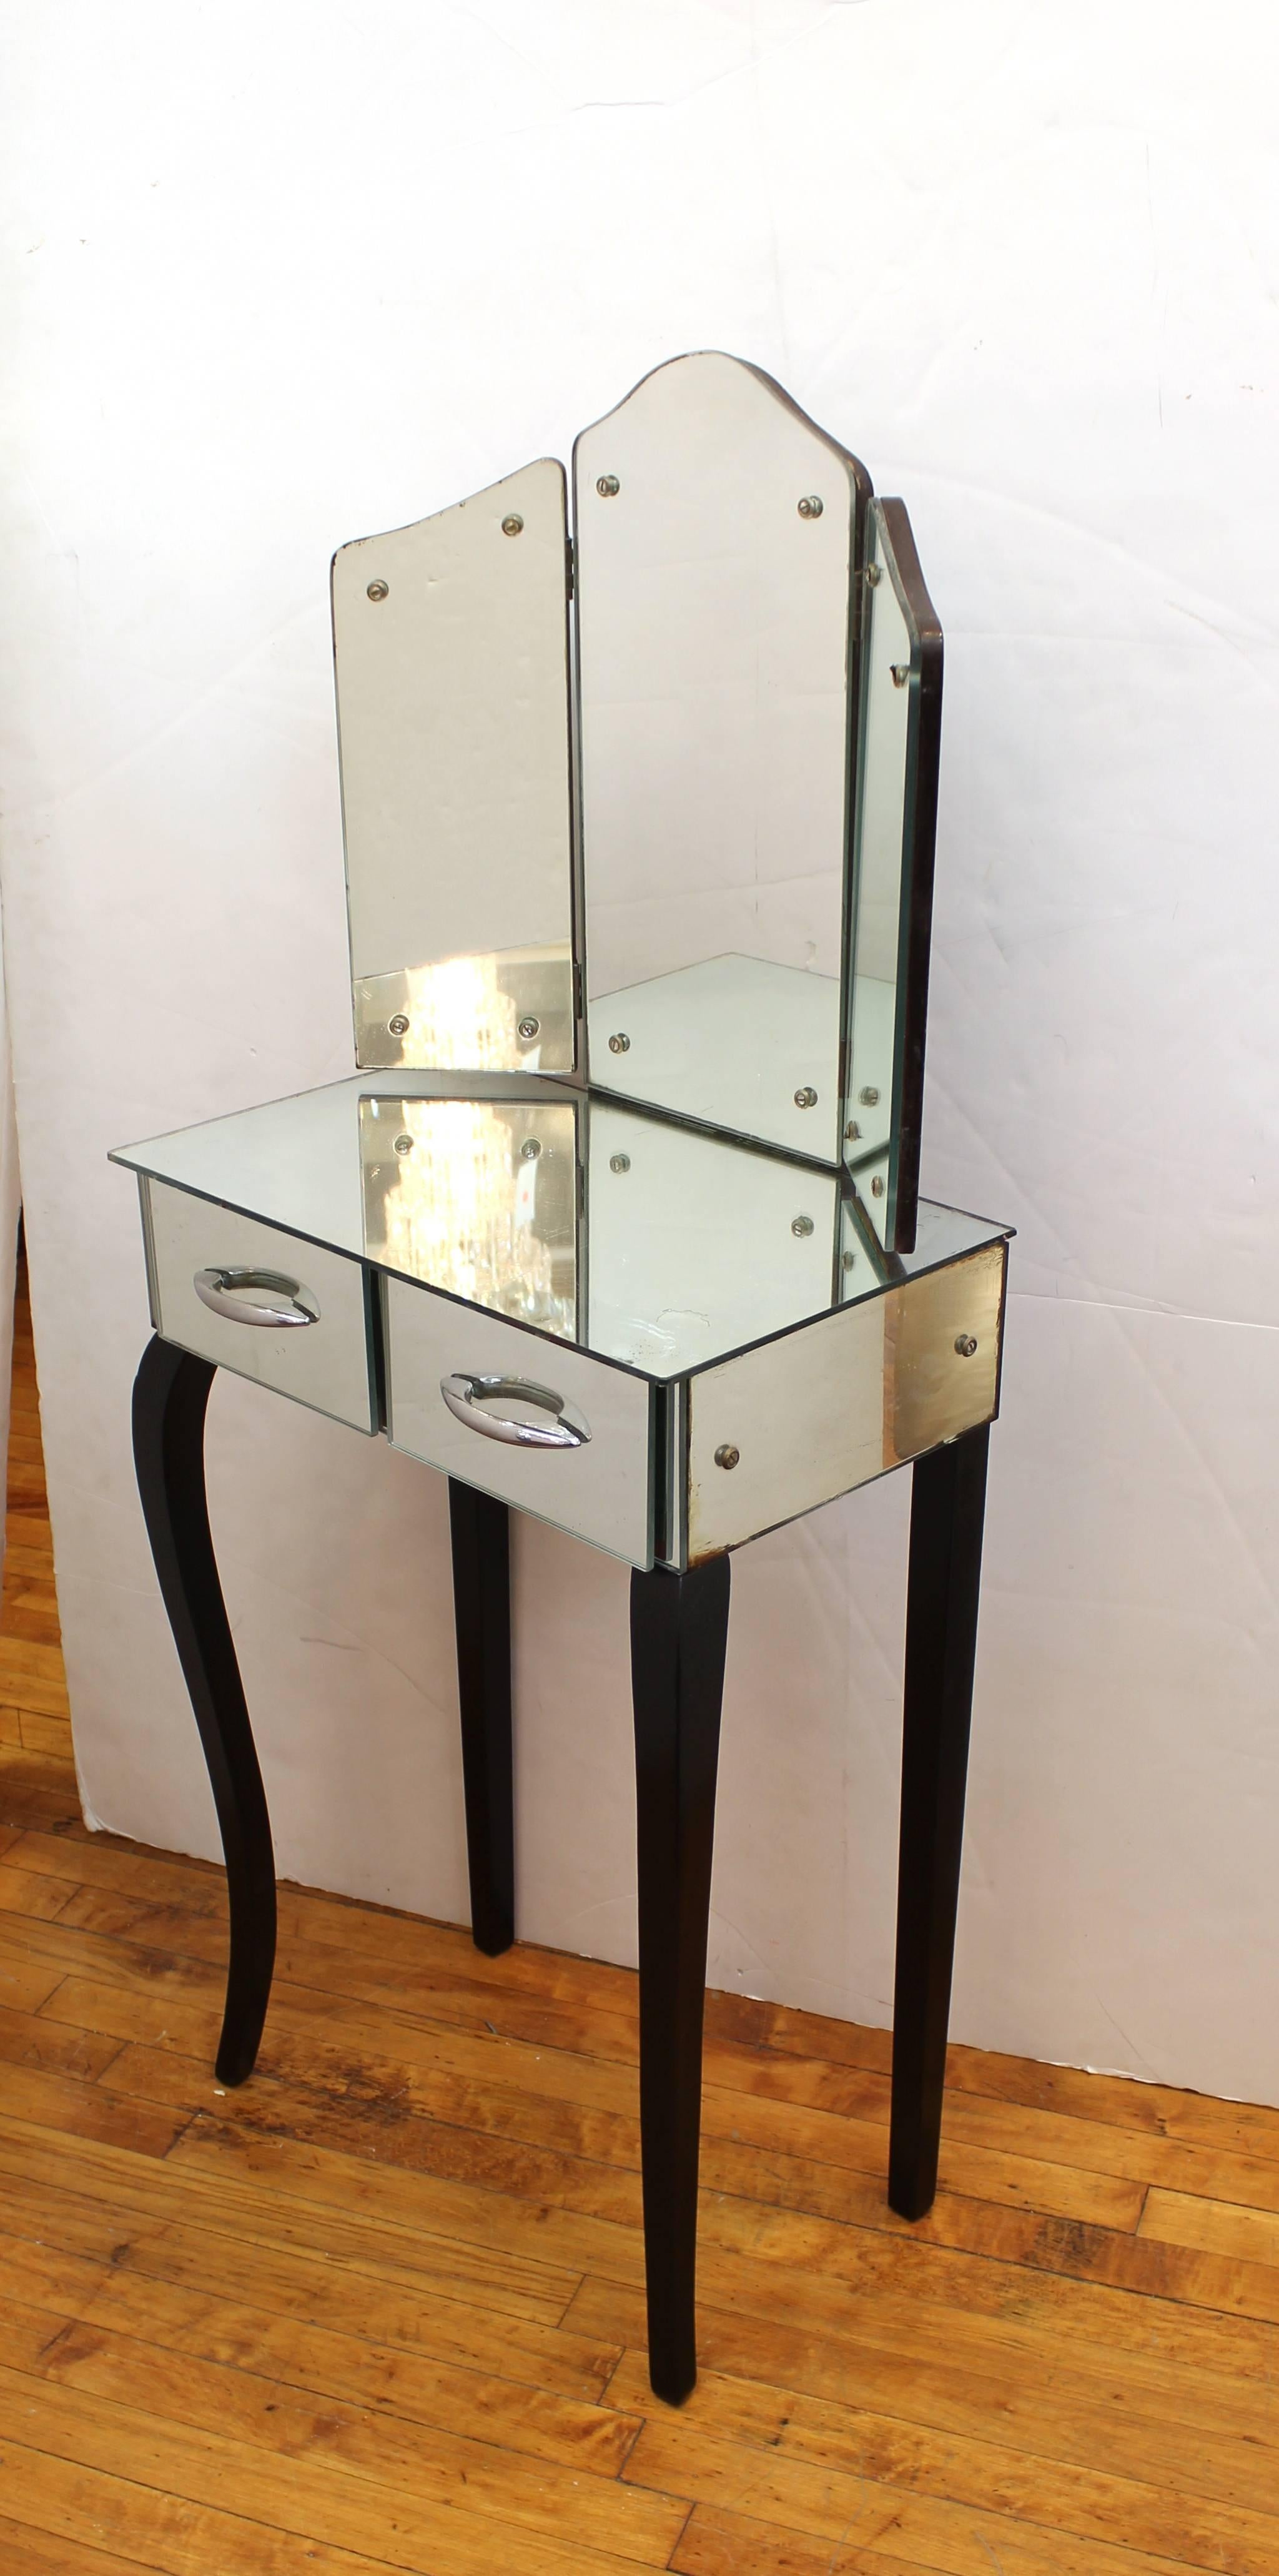 Art Deco vanity table with trifold mirror produced in France during the 1930s. The table features a mirrored surface including two drawers. A trifold mirror with arched center panel is also included. The piece sits on gently curved black legs. Wear